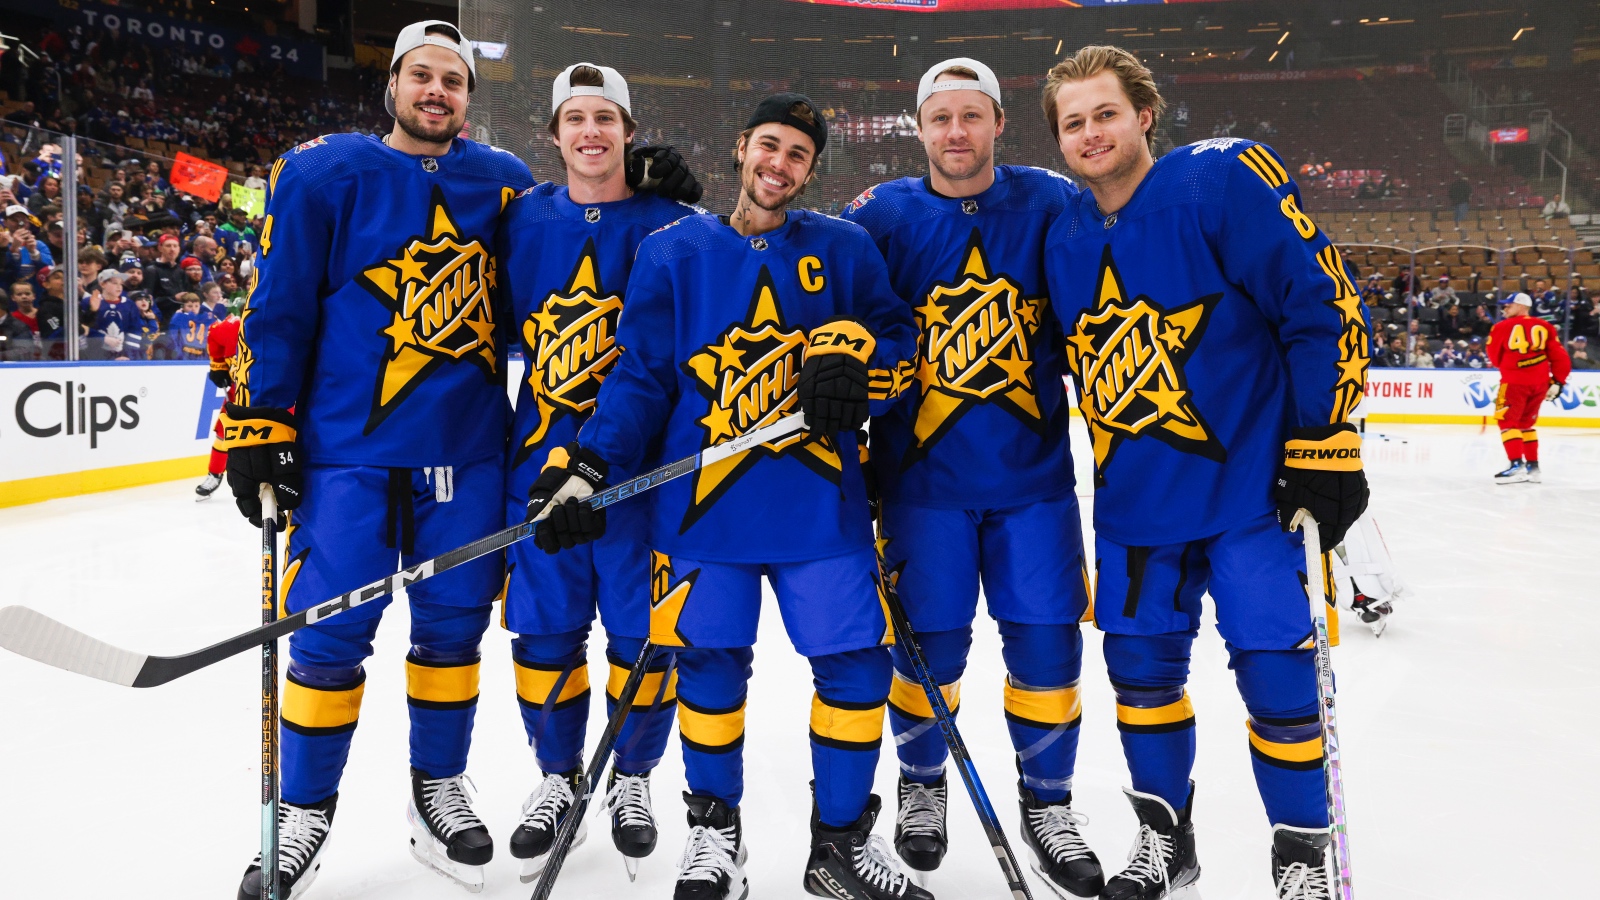 Justin Bieber at the NHL All Star Game playing hockey with the pros